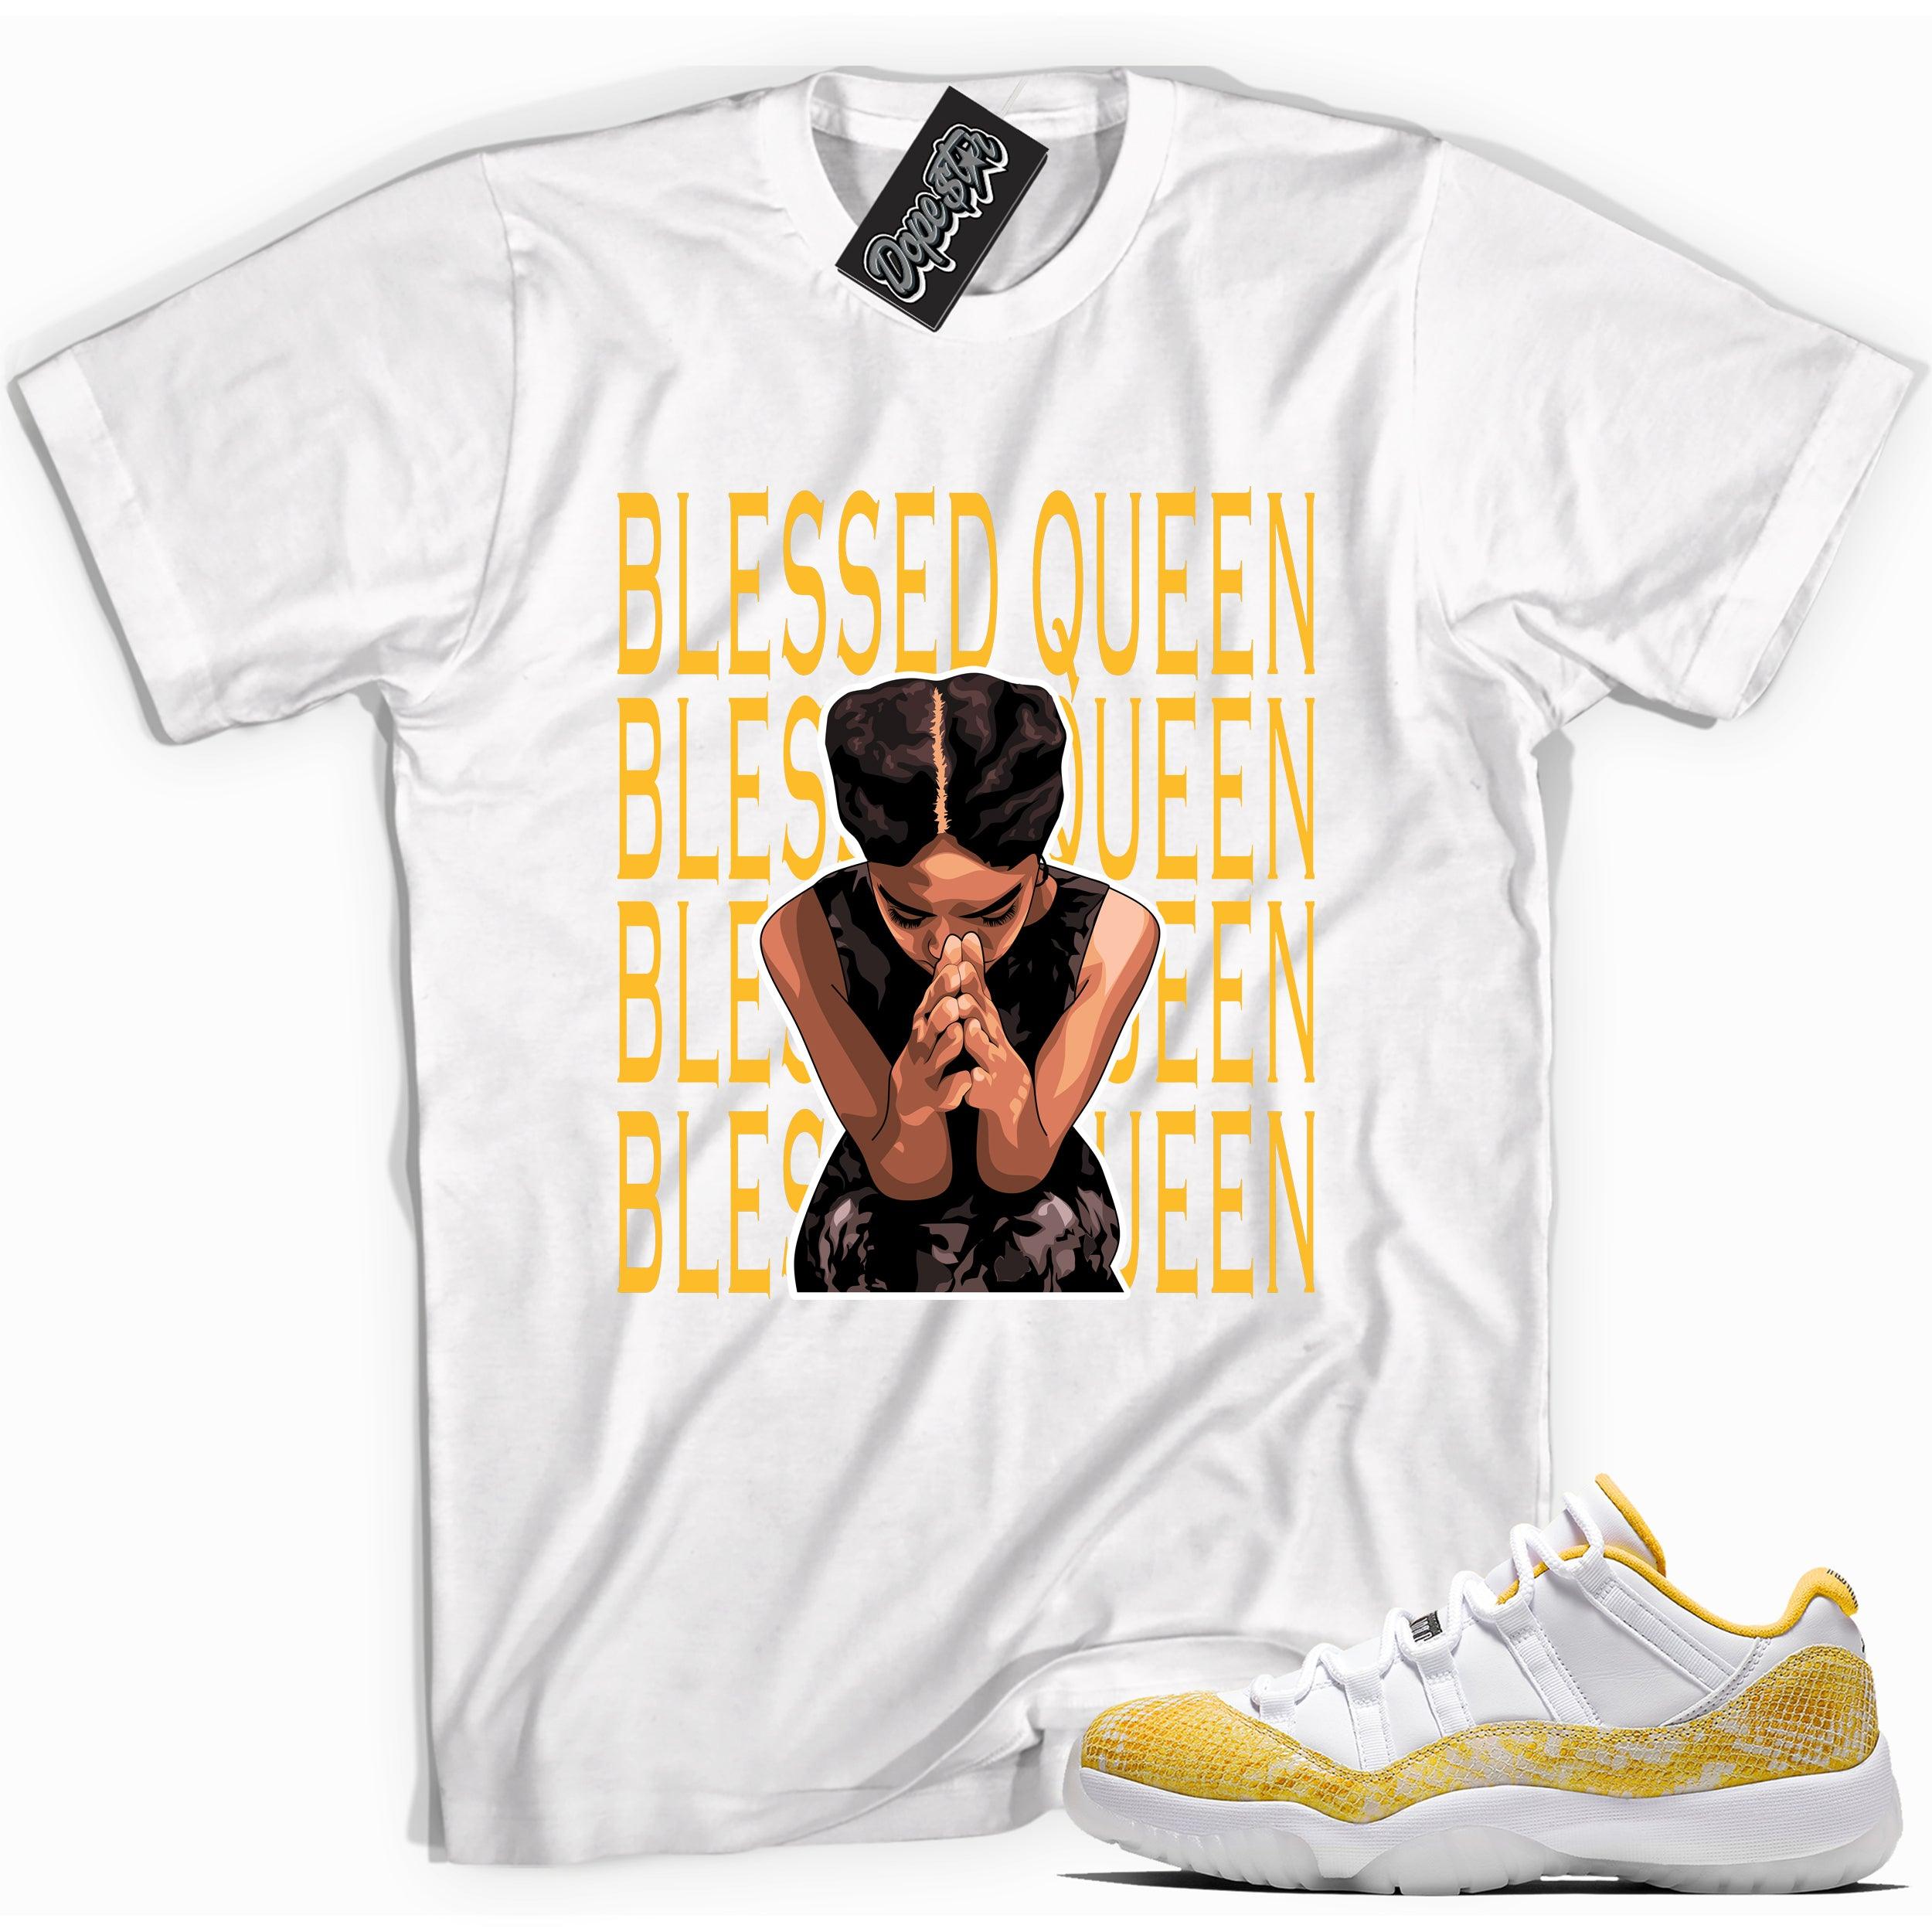 Cool white graphic tee with 'blessed queen' print, that perfectly matches Air Jordan 11 Retro Low Yellow Snakeskin sneakers